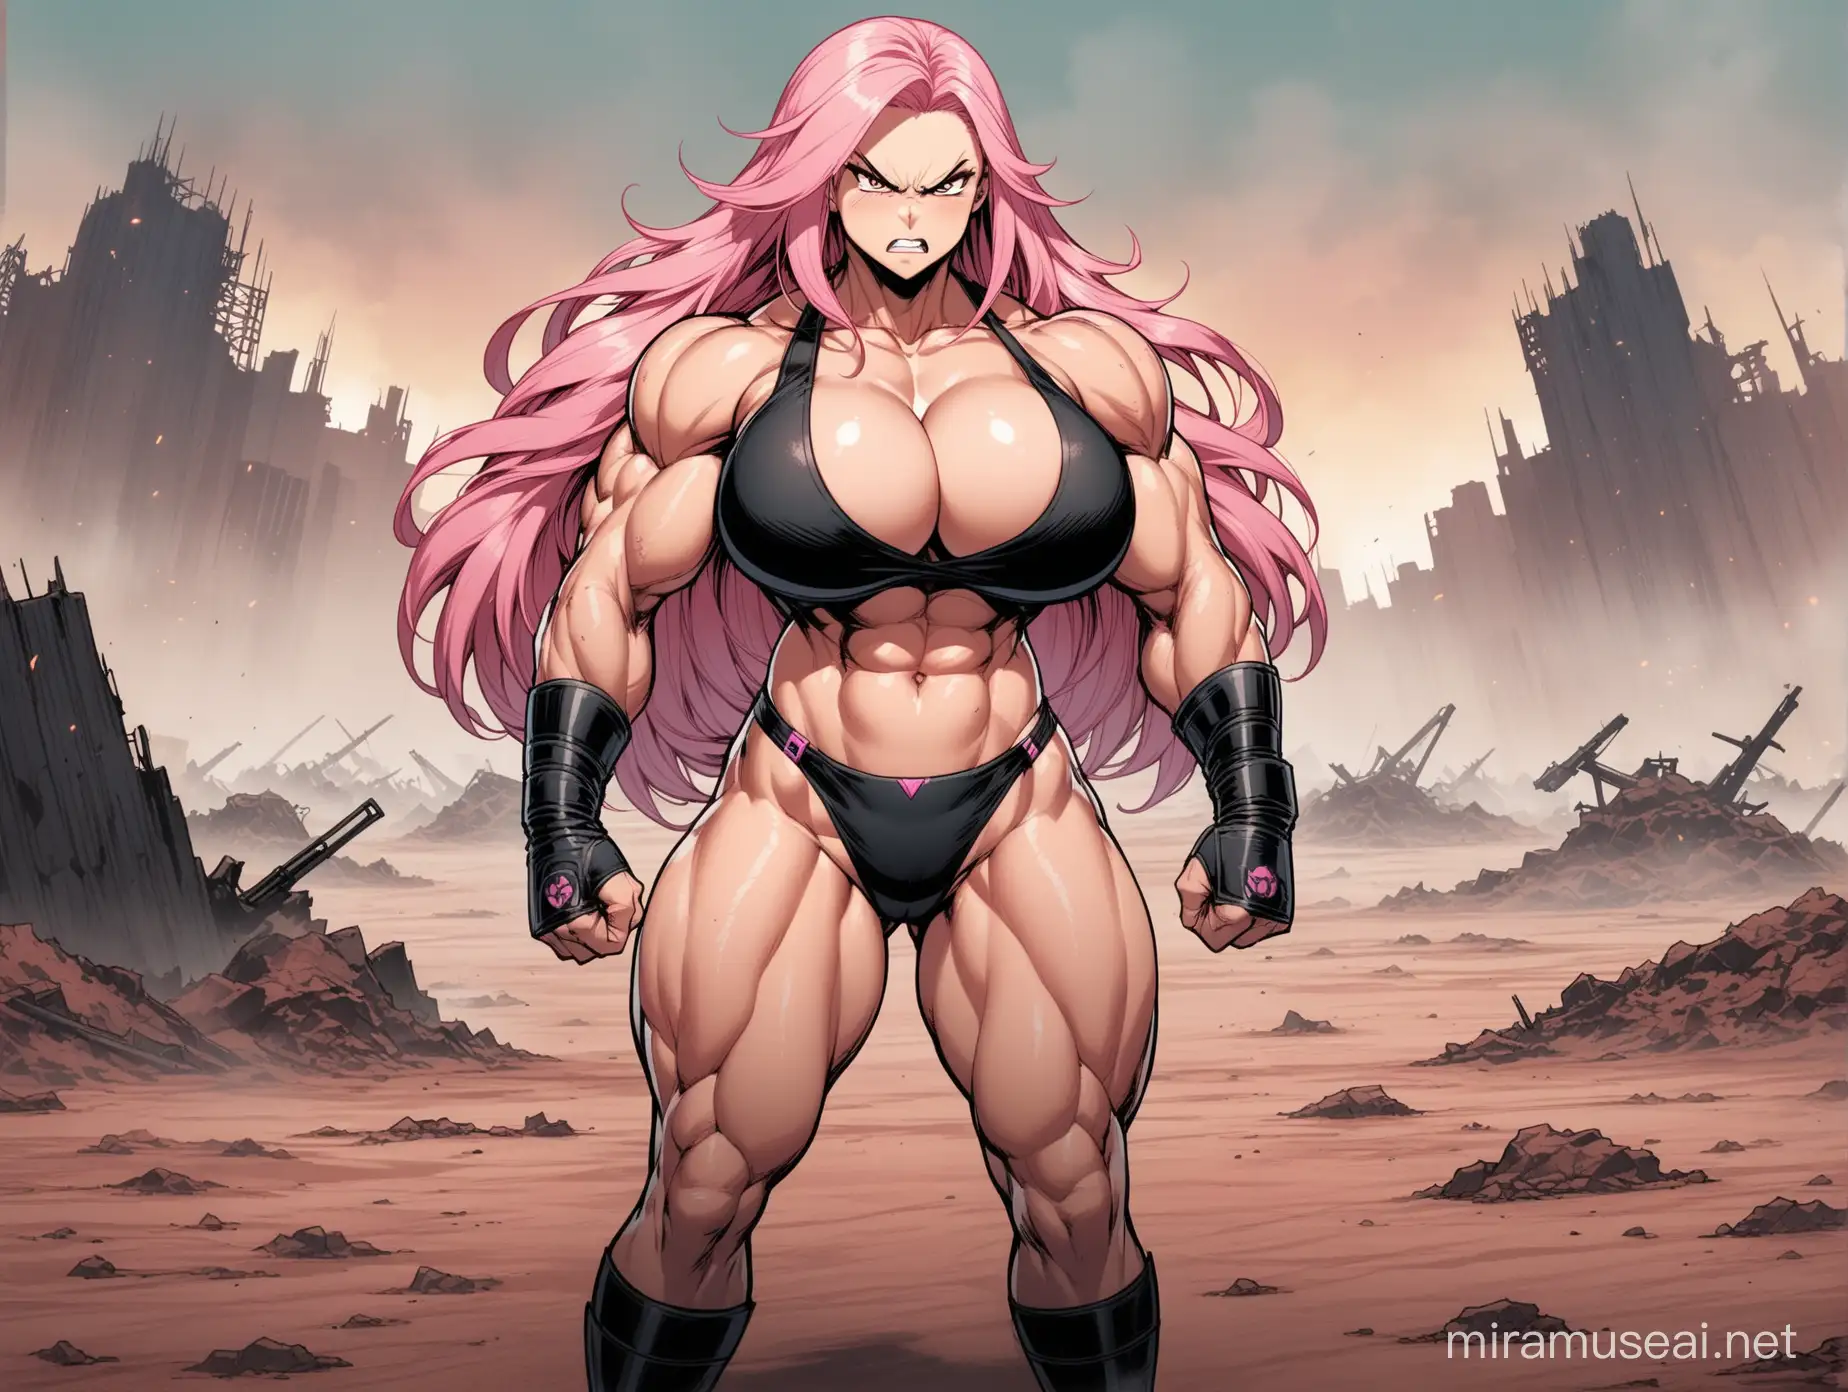 Angry Strong Woman in Black Suit with Pink Accents Against Desolate Wasteland Background